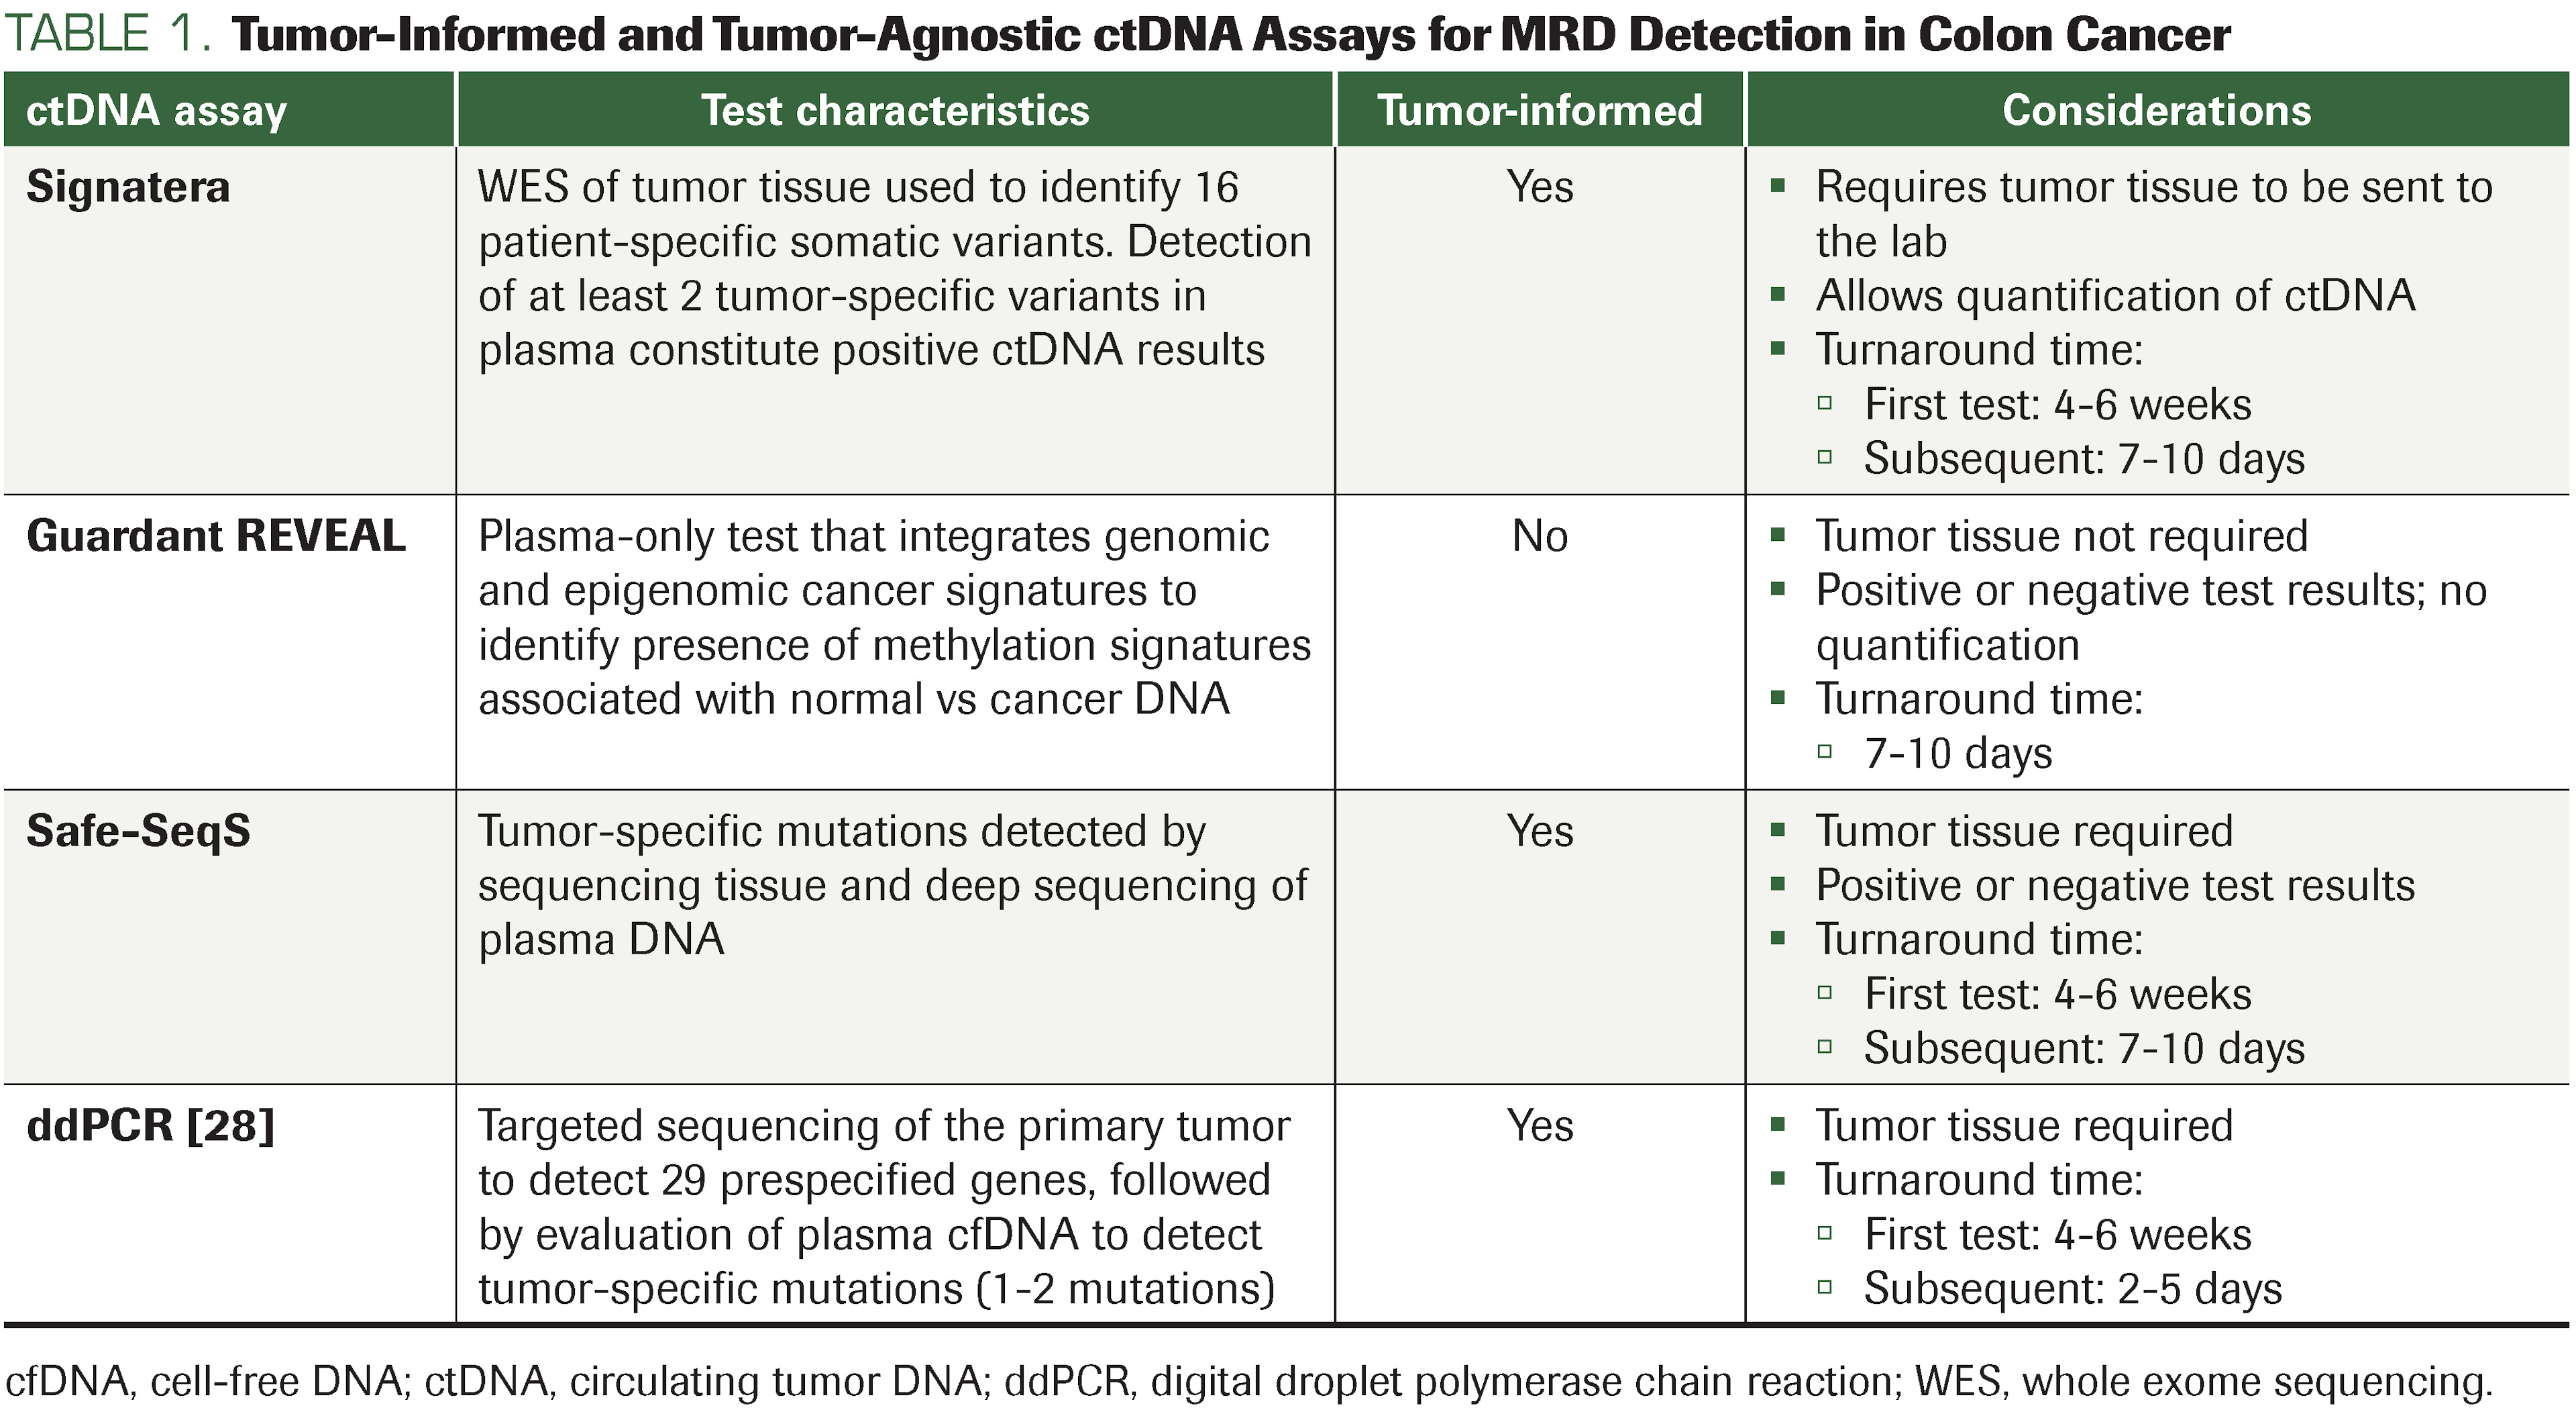 TABLE 1. Tumor-Informed and Tumor-Agnostic ctDNA Assays for MRD Detection in Colon Cancer